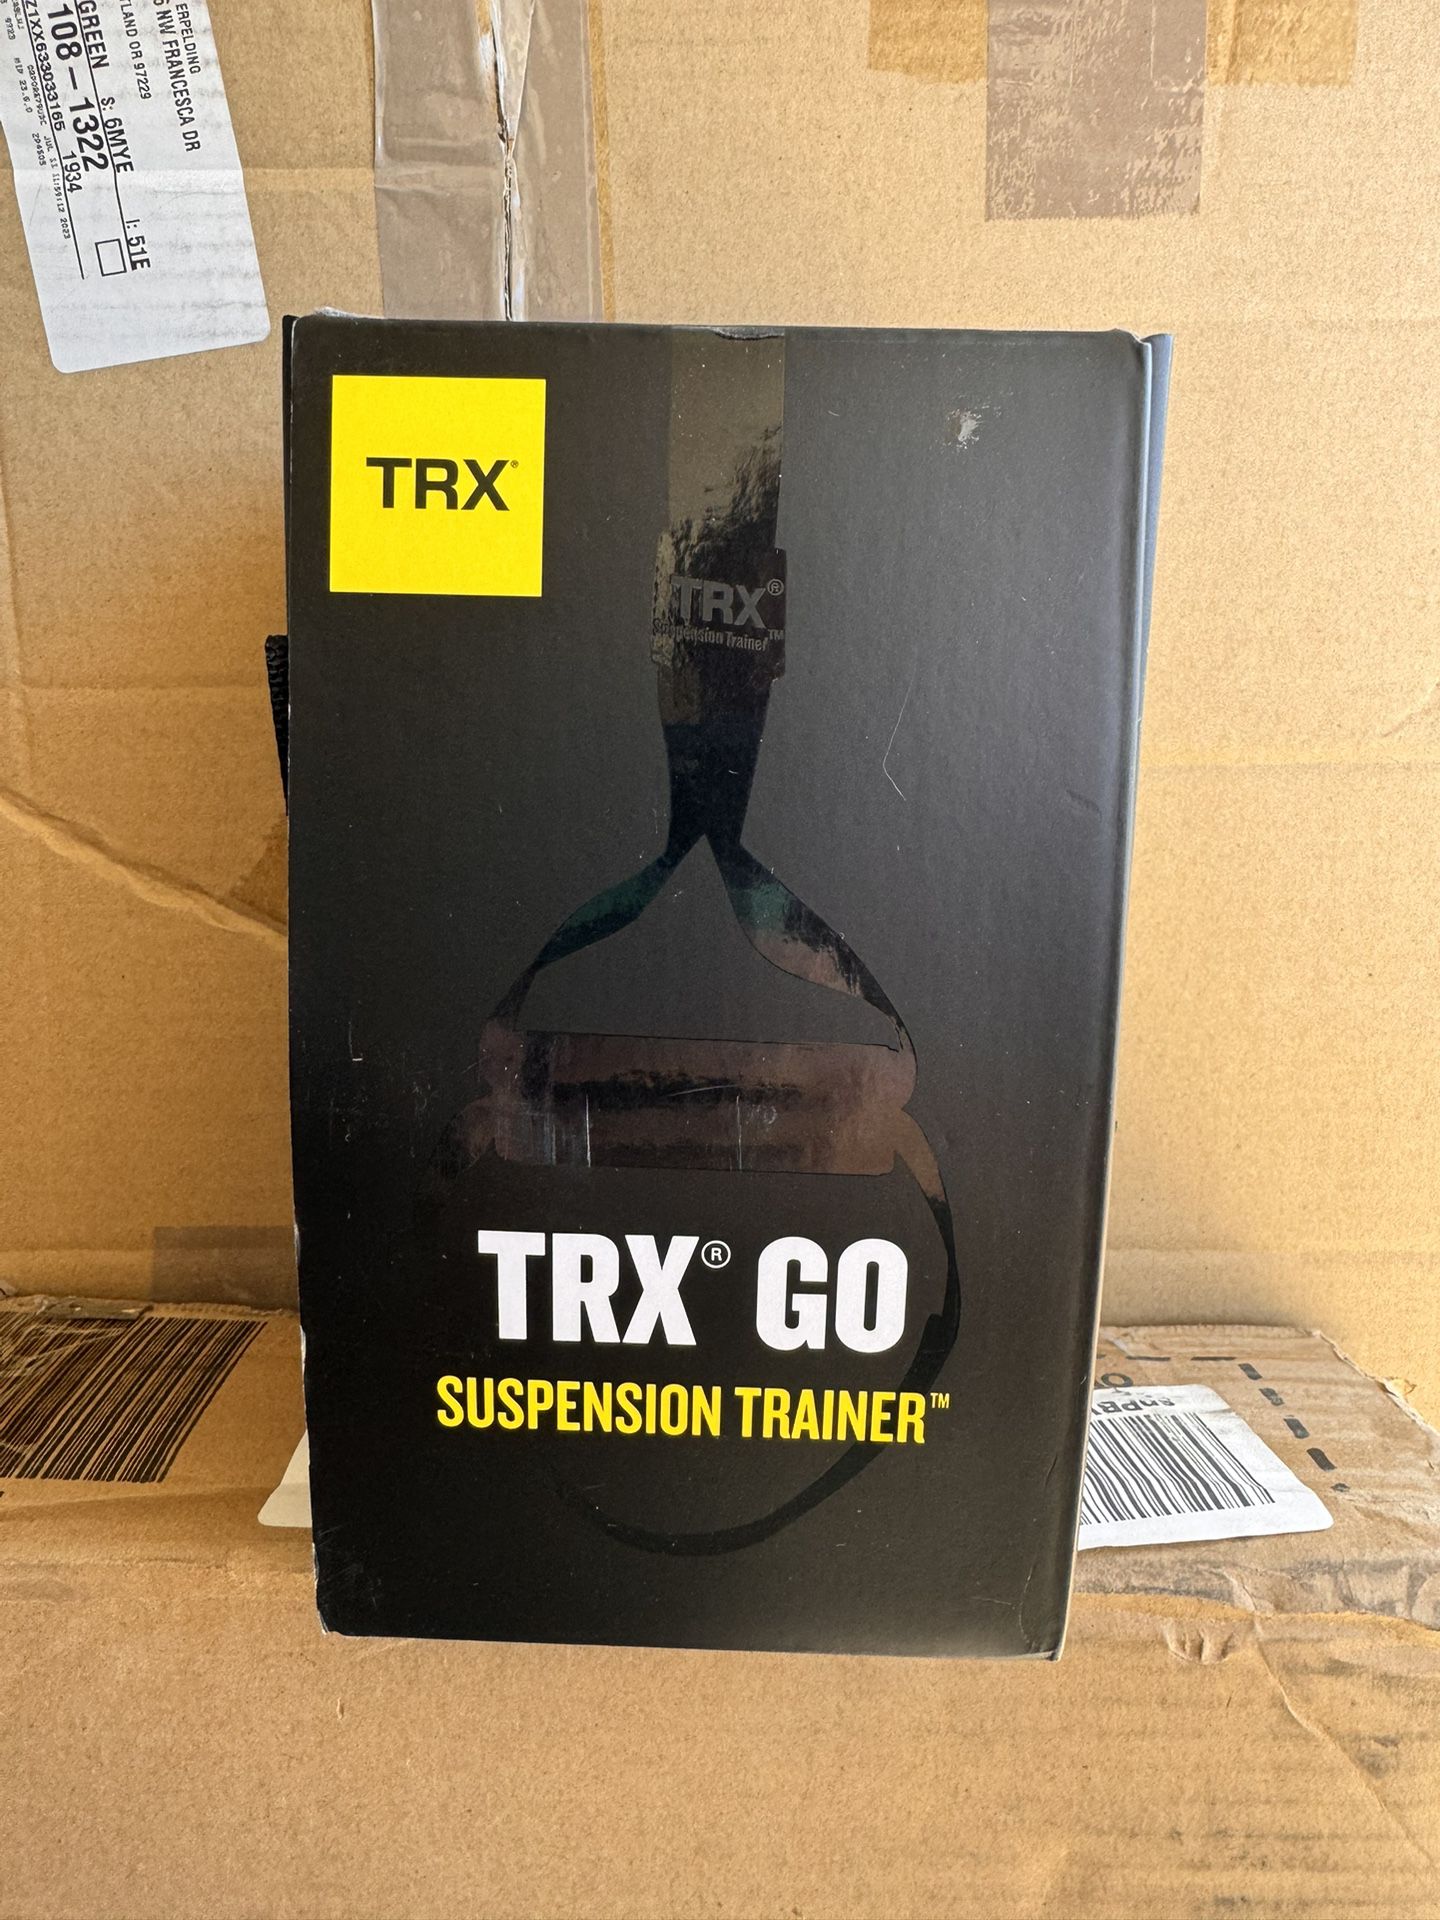 Suspension Trainer System - TRX GO - Full-Body Workout - Outdoor Workouts - Gym Equipment 